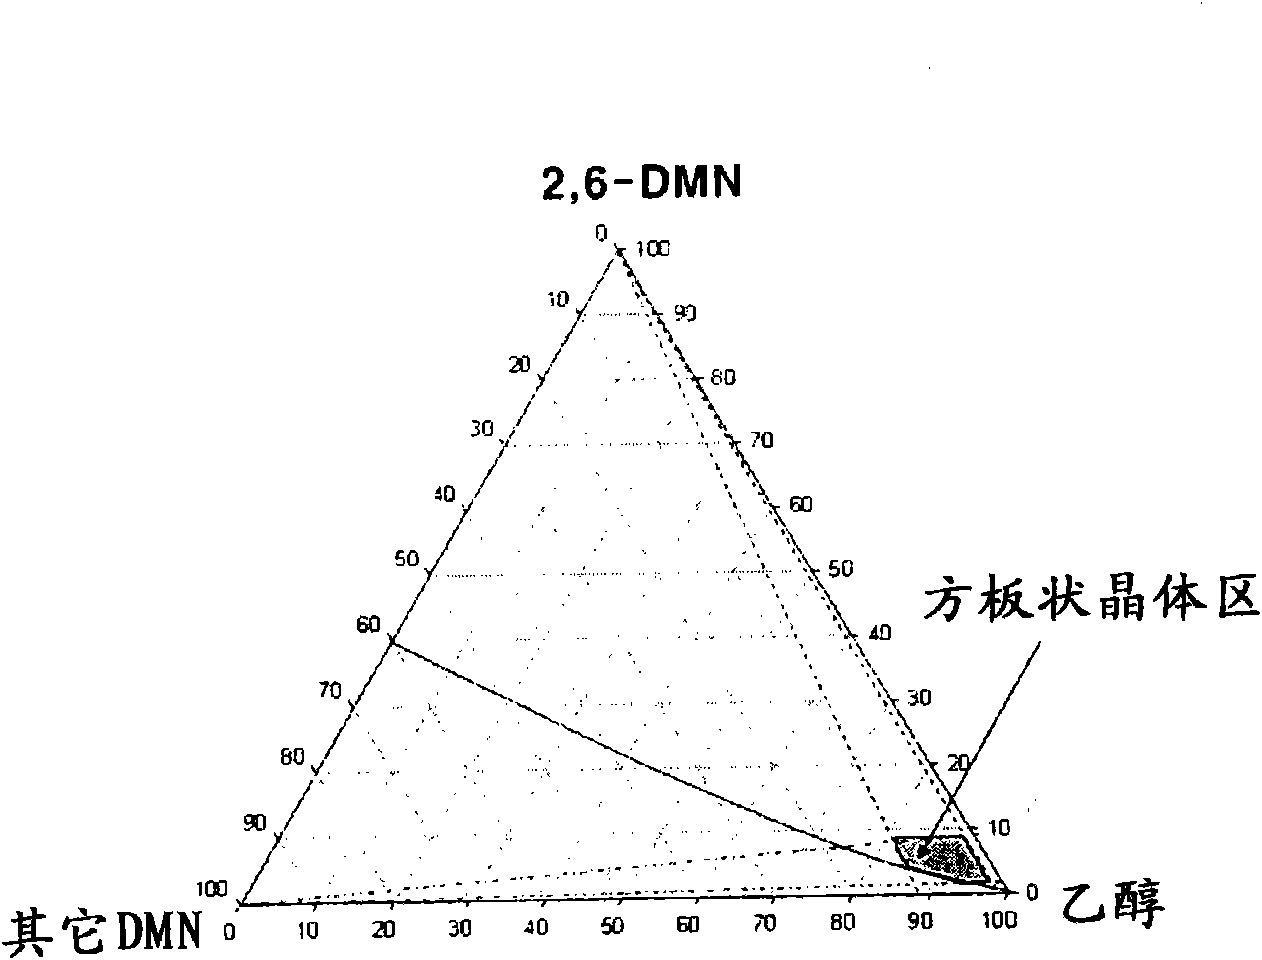 Method for achieving high purity separation and refinement by controlling morphology and particle size of 2, 6-dimethylnaphthalene crystals